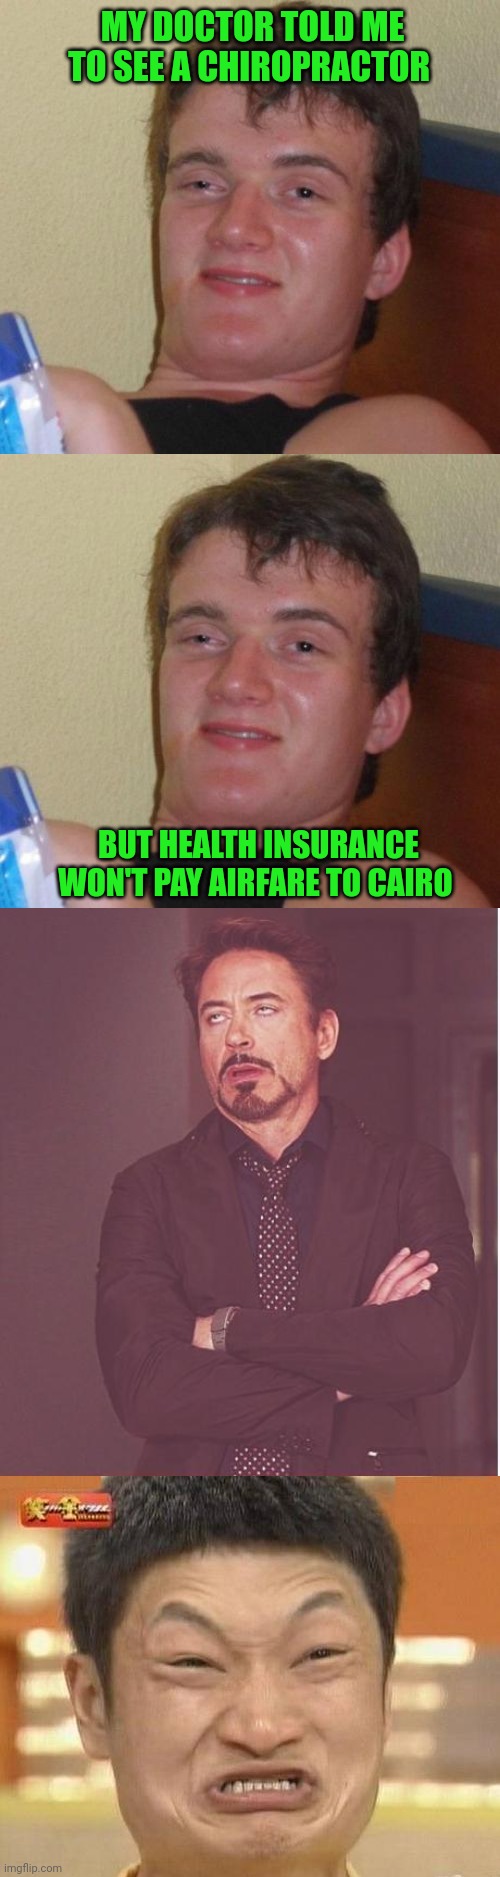 . | MY DOCTOR TOLD ME TO SEE A CHIROPRACTOR; BUT HEALTH INSURANCE WON'T PAY AIRFARE TO CAIRO | image tagged in memes,10 guy,face you make robert downey jr,impossibru guy original,fat girl running,tuesday | made w/ Imgflip meme maker